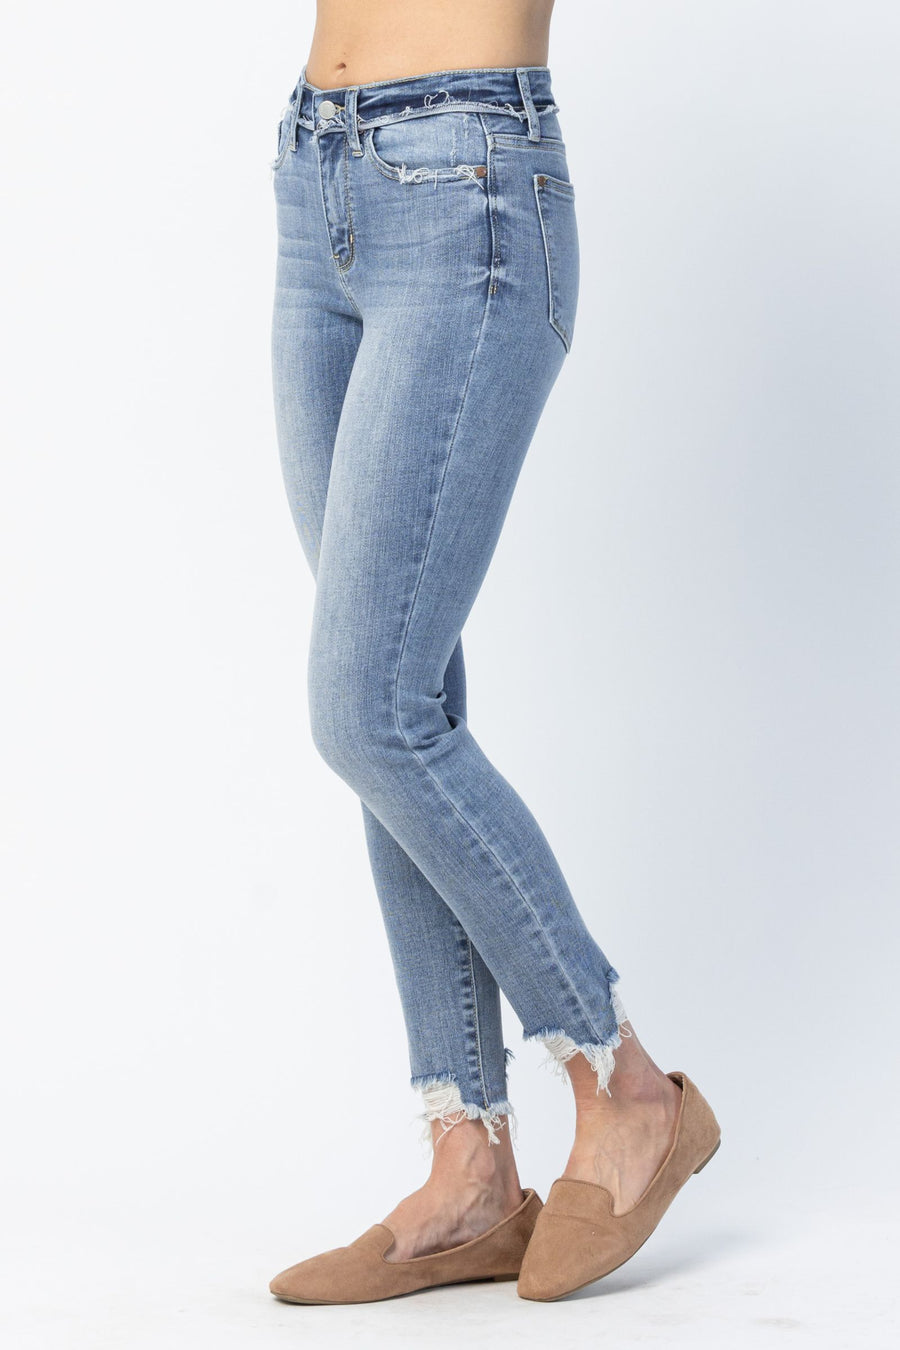 Judy Blue - Mid Rise Released Waistband Skinny